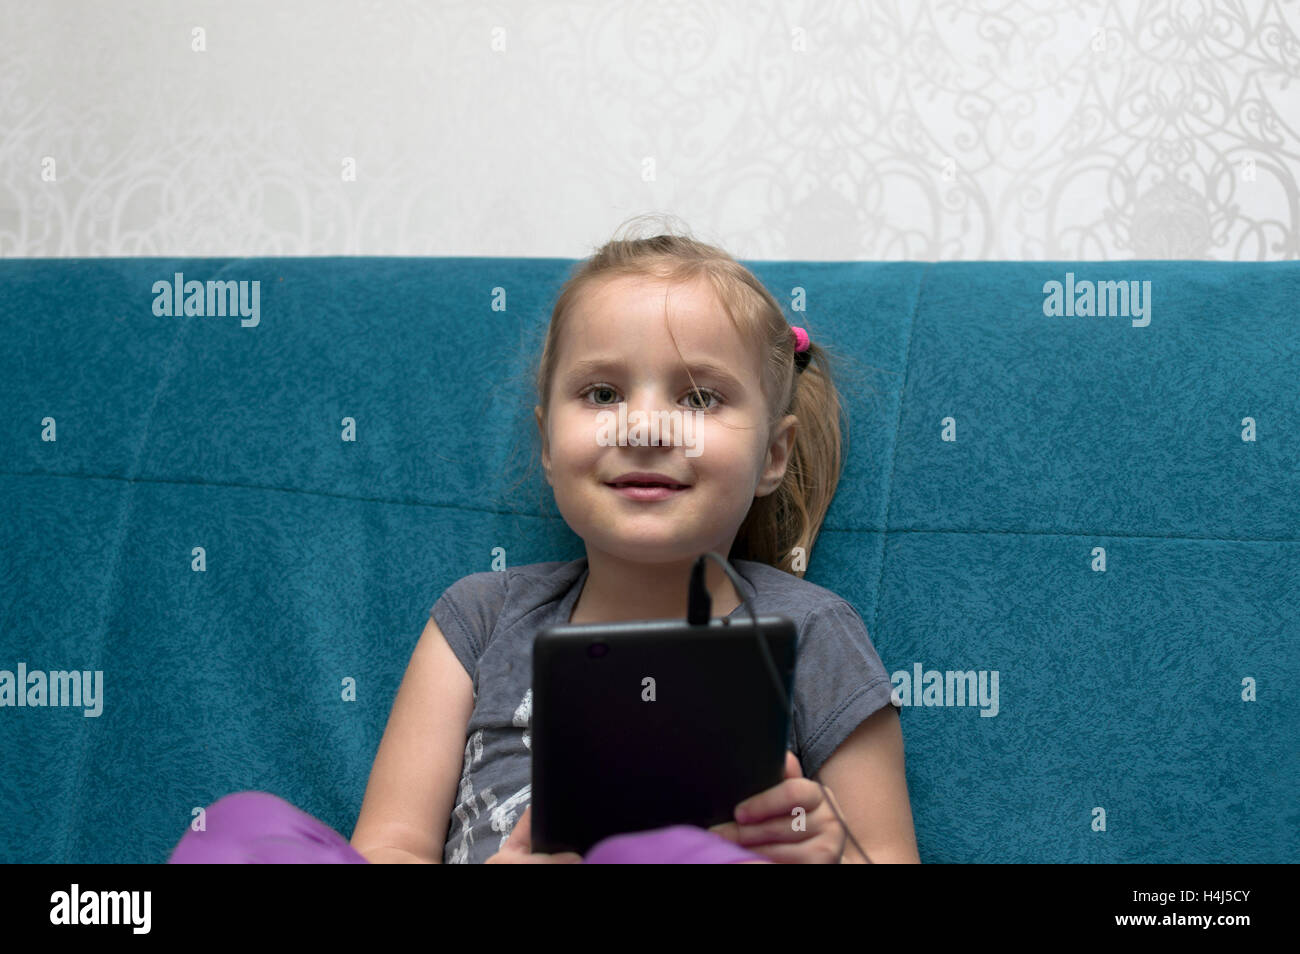 A  little girl, looking happy posing with a tablet, sitting on a sofe, indoors cropped portrait Stock Photo